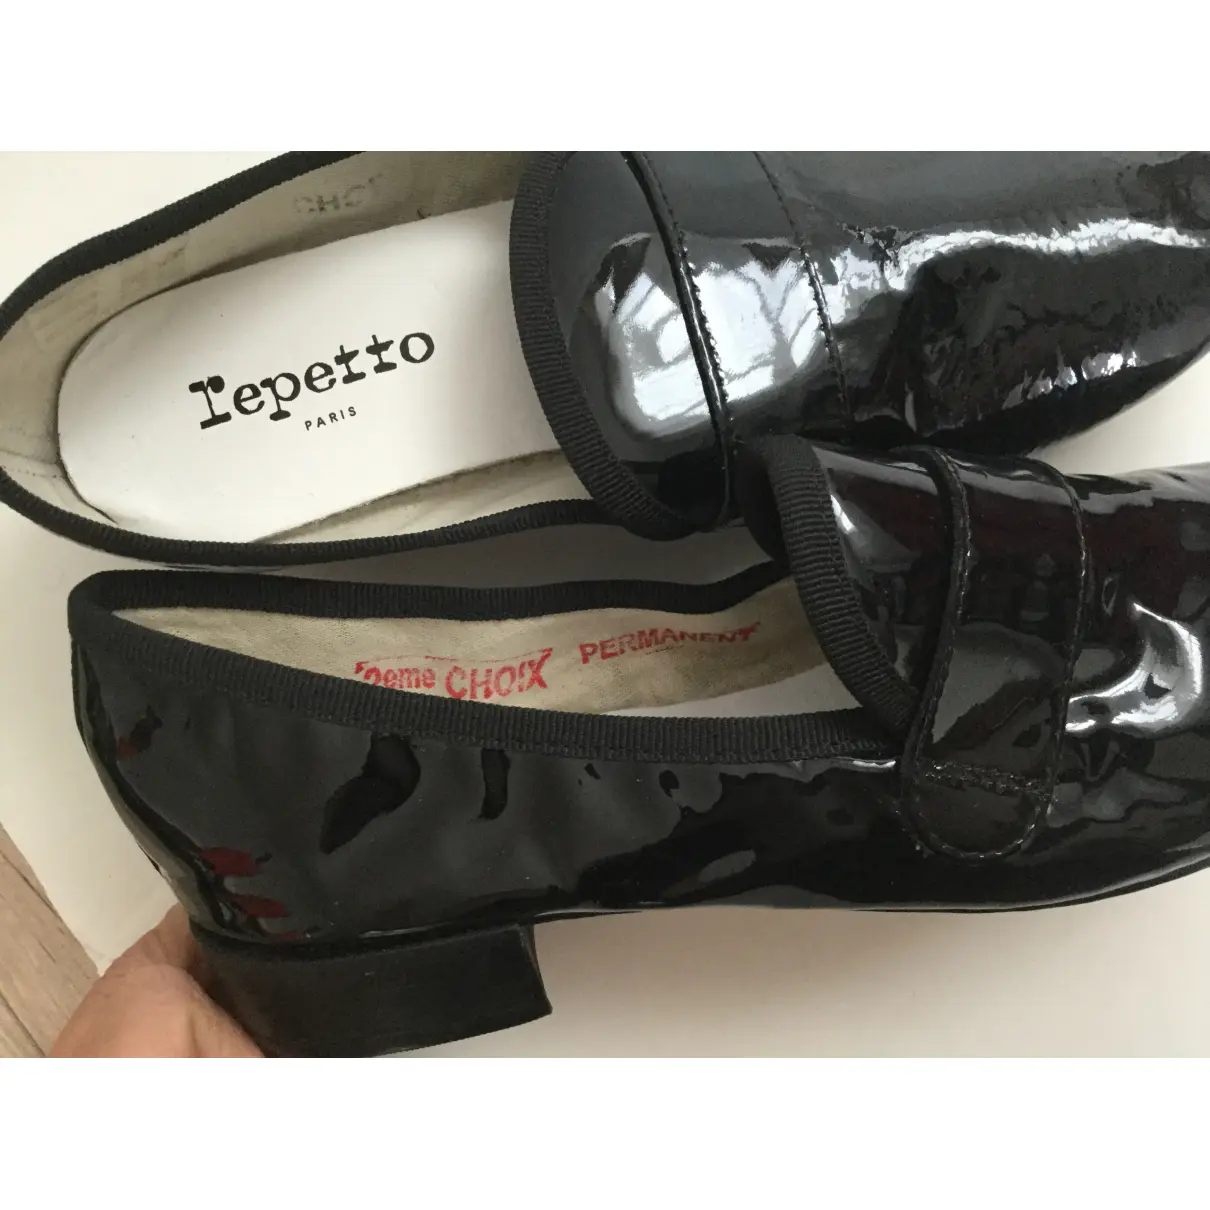 Patent leather flats Repetto